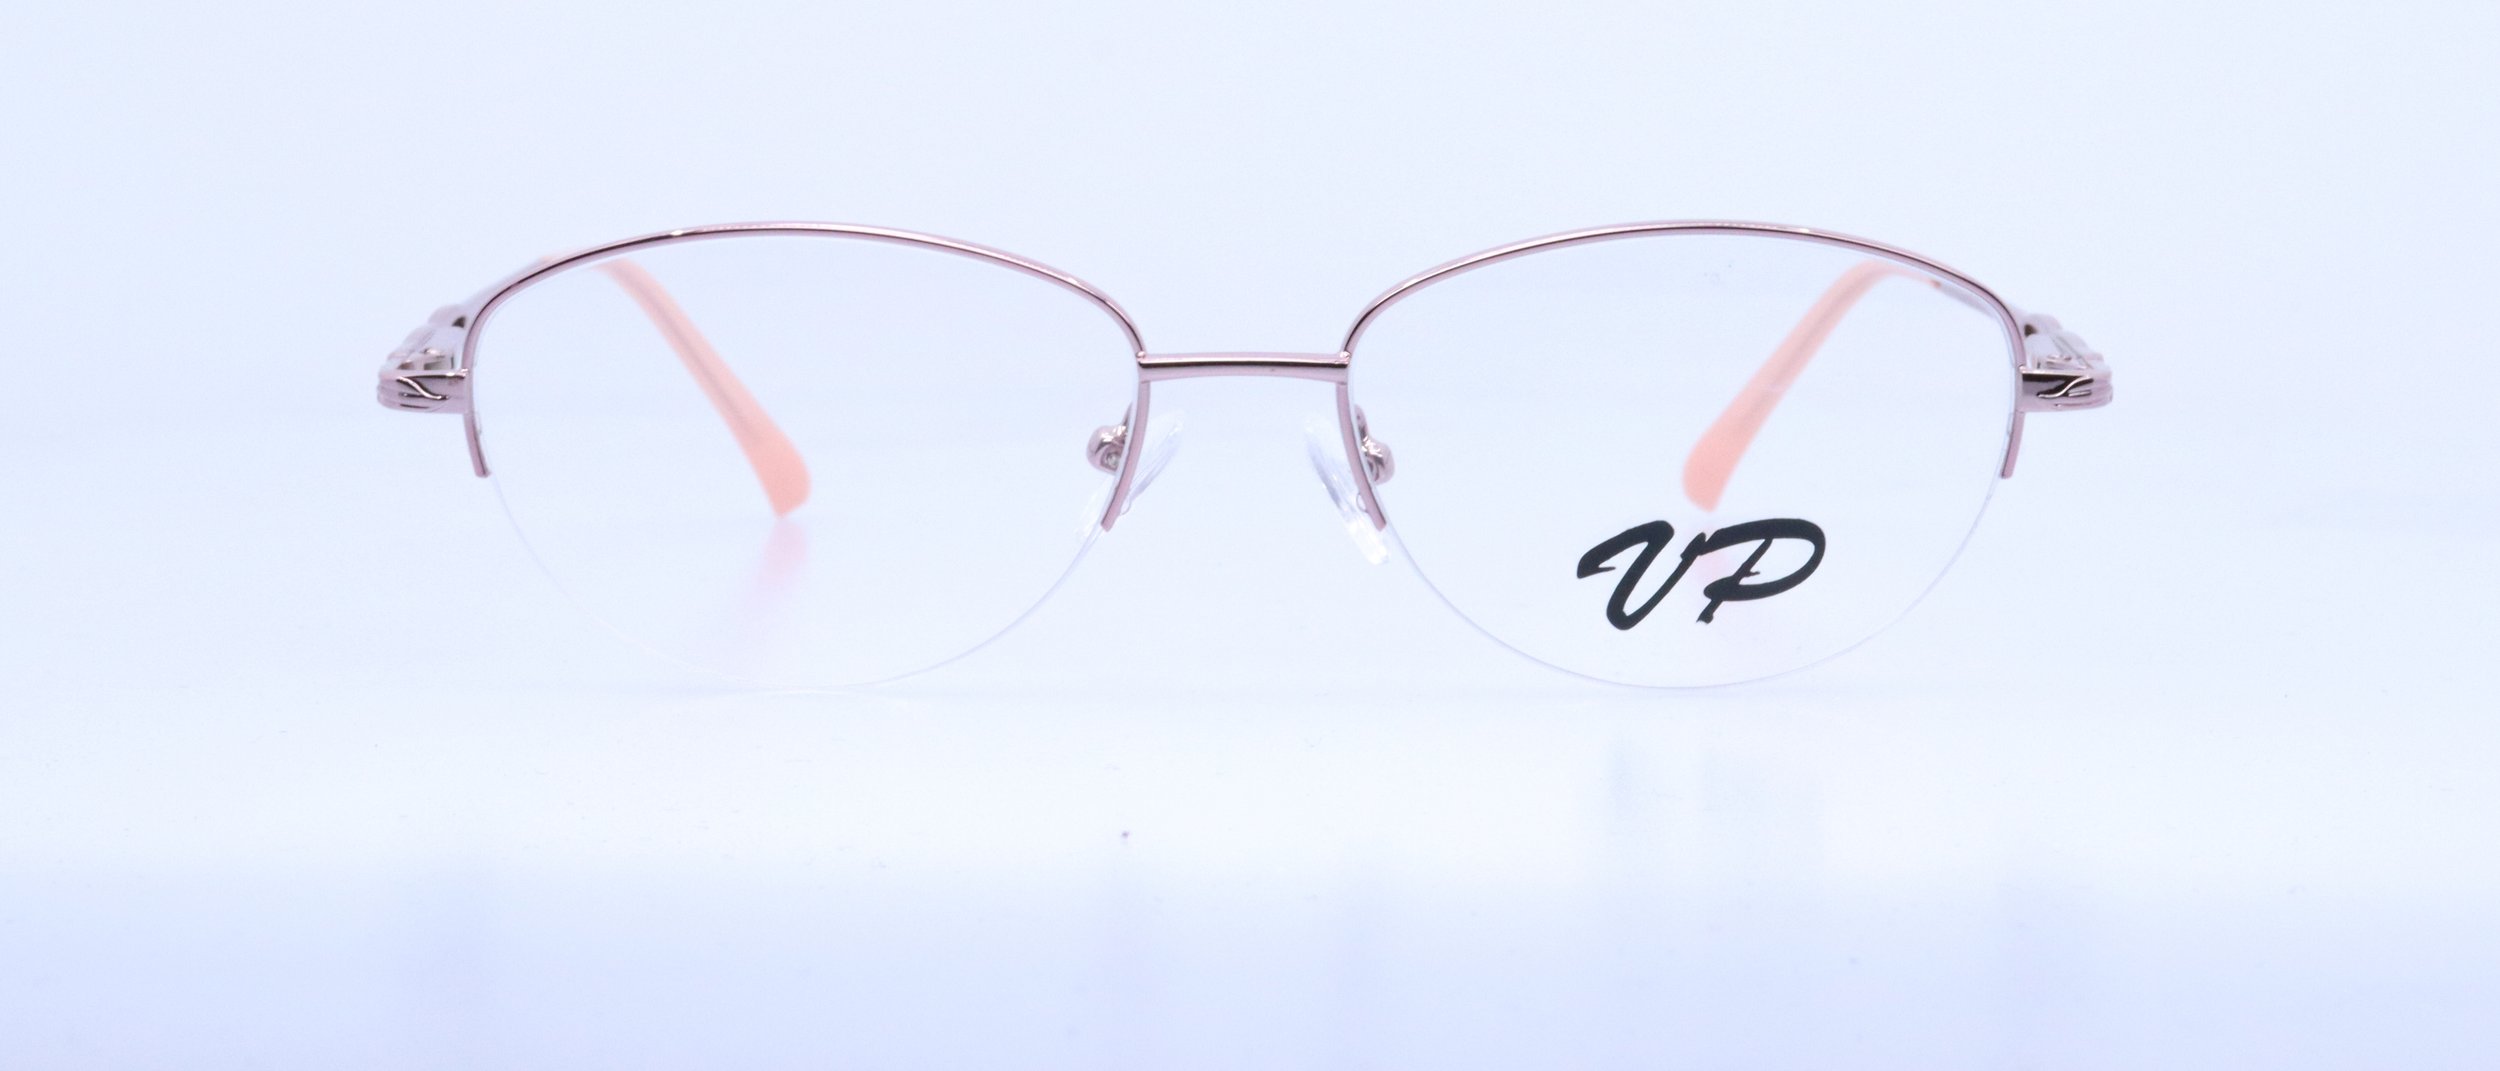  NEW!! VP163: 54-17-140, Available in Blush or Burgundy 